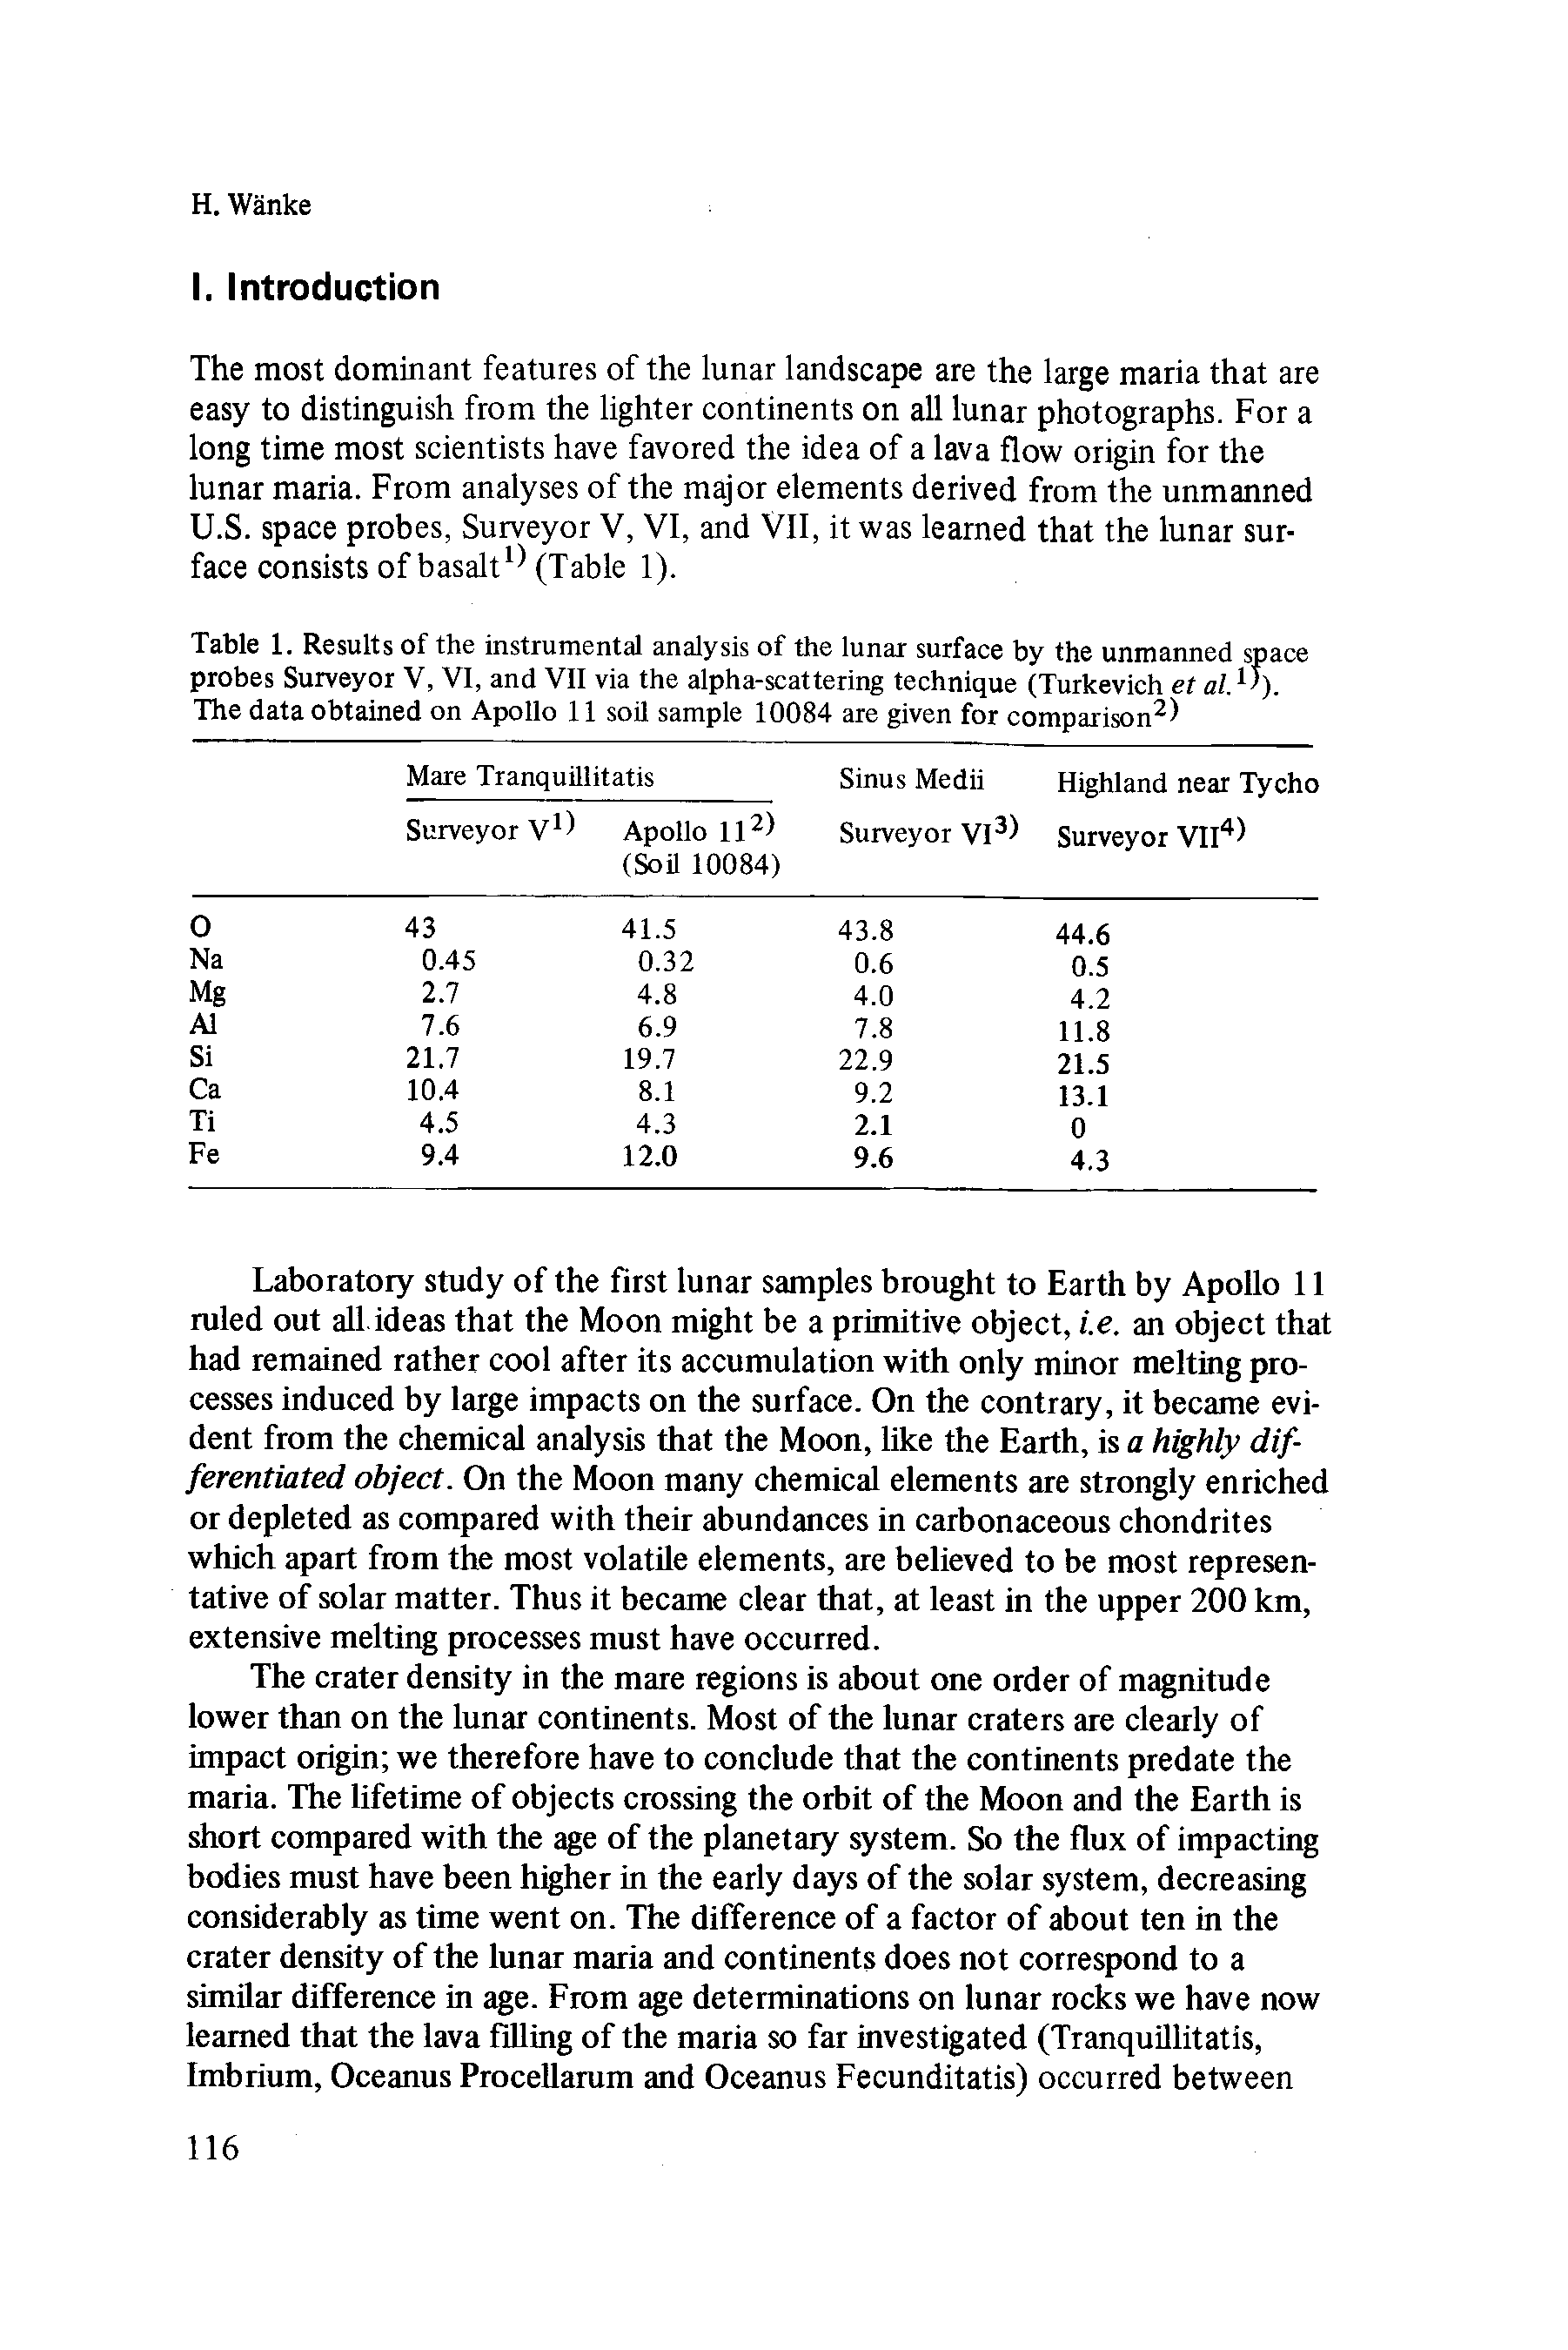 Table 1. Results of the instrumental analysis of the lunar surface by the unmanned space probes Surveyor V, VI, and VII via the alpha-scattering technique (Turkevich et al.1 ). The data obtained on Apollo 11 soil sample 10084 are given for comparison2)...